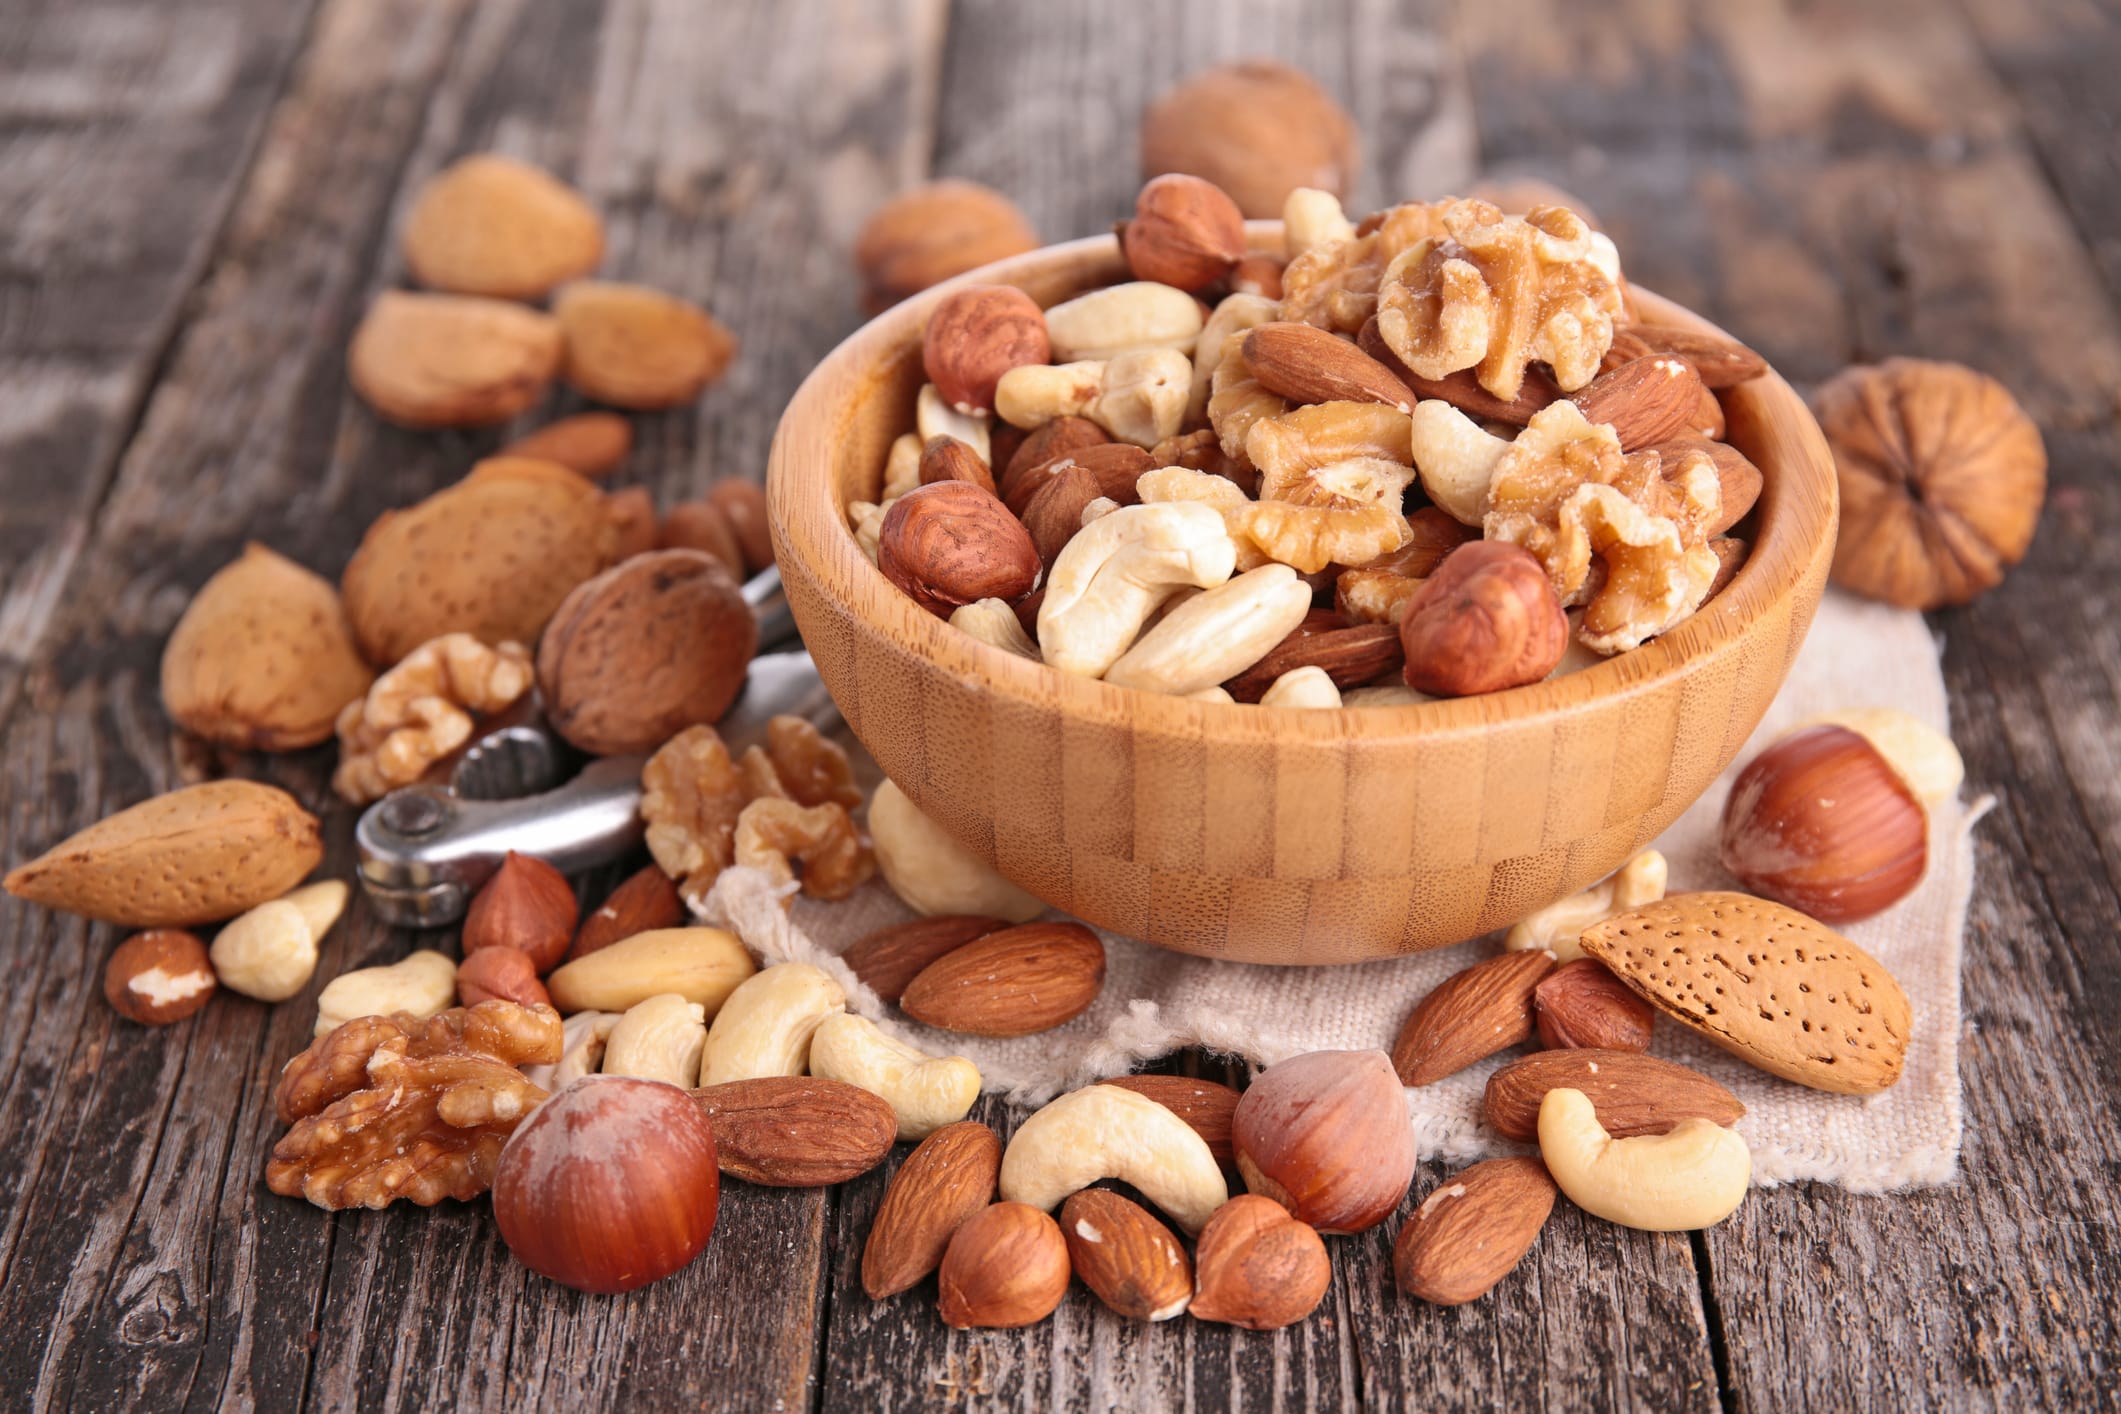 Tree Nut Allergies: What are They? - Allergic Living